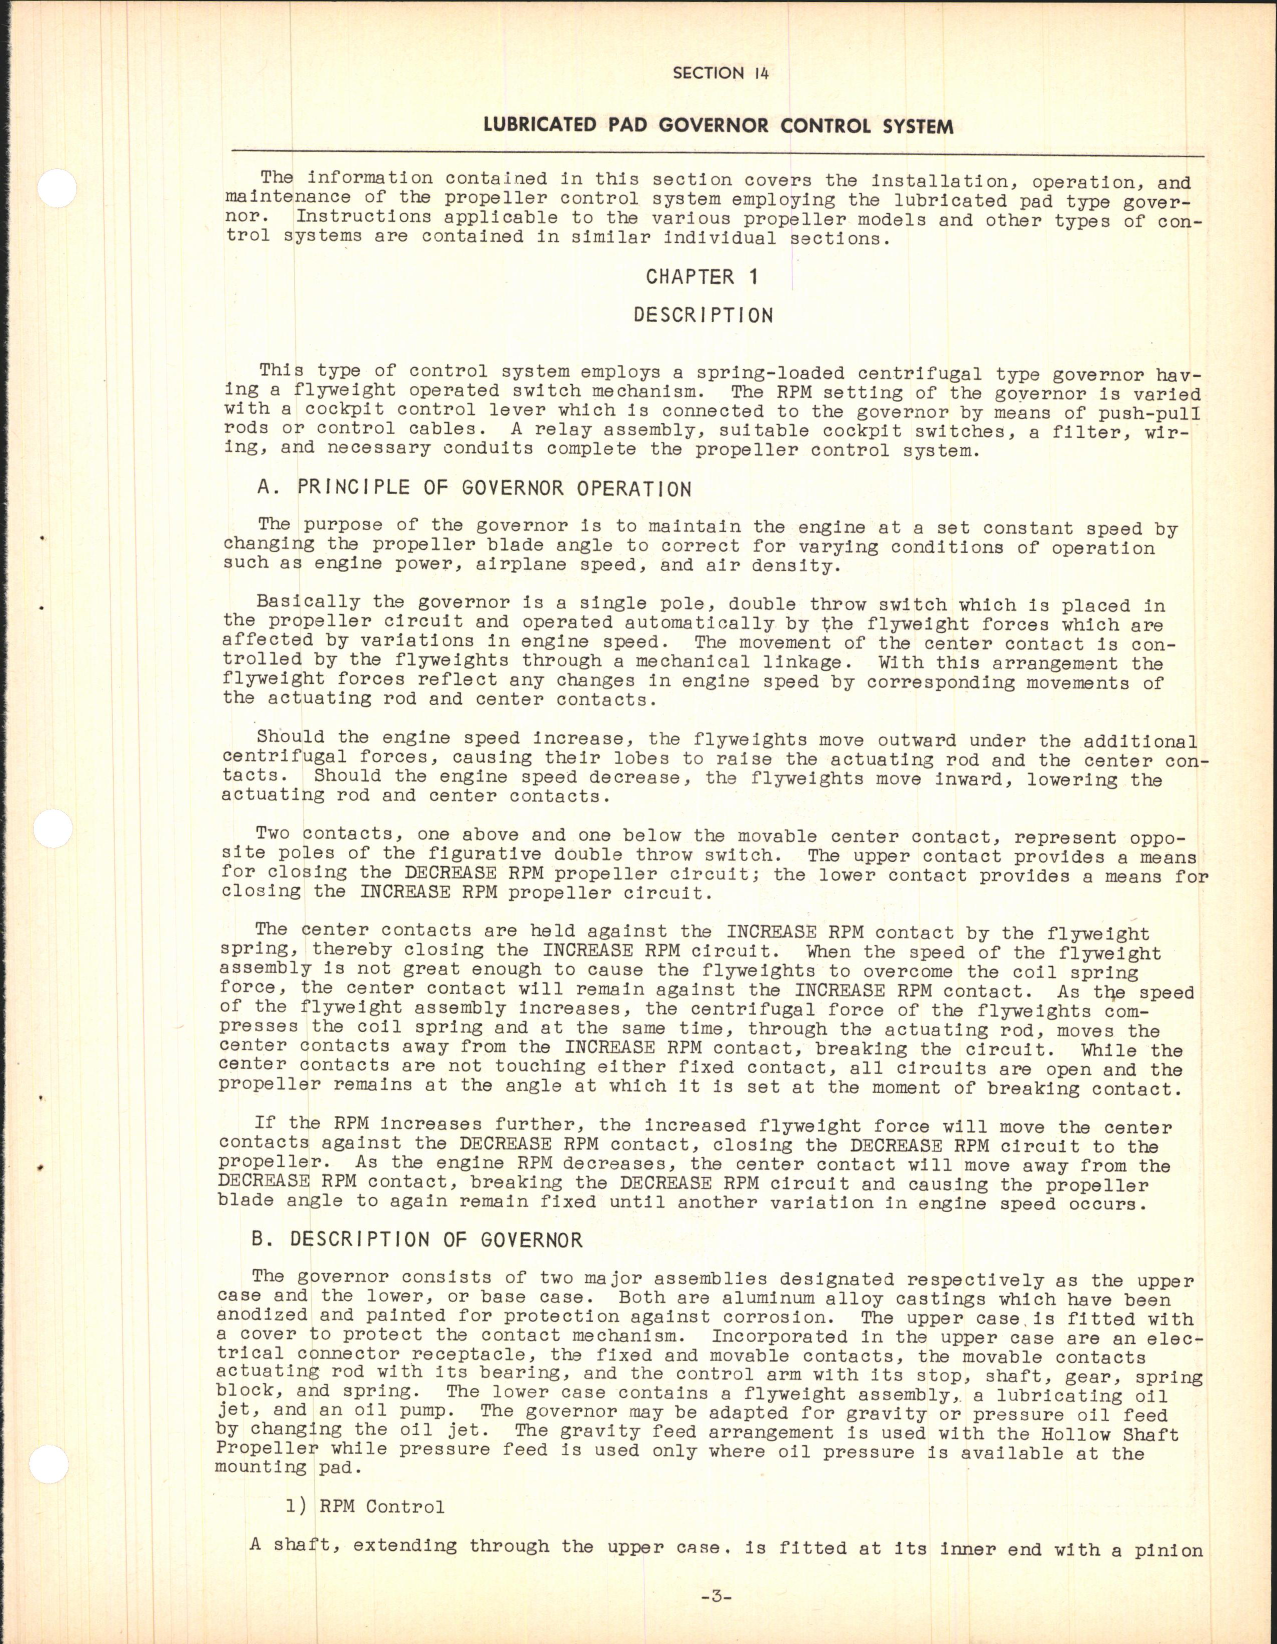 Sample page 5 from AirCorps Library document: Section 14 - Lubricated Pad Governor Control System